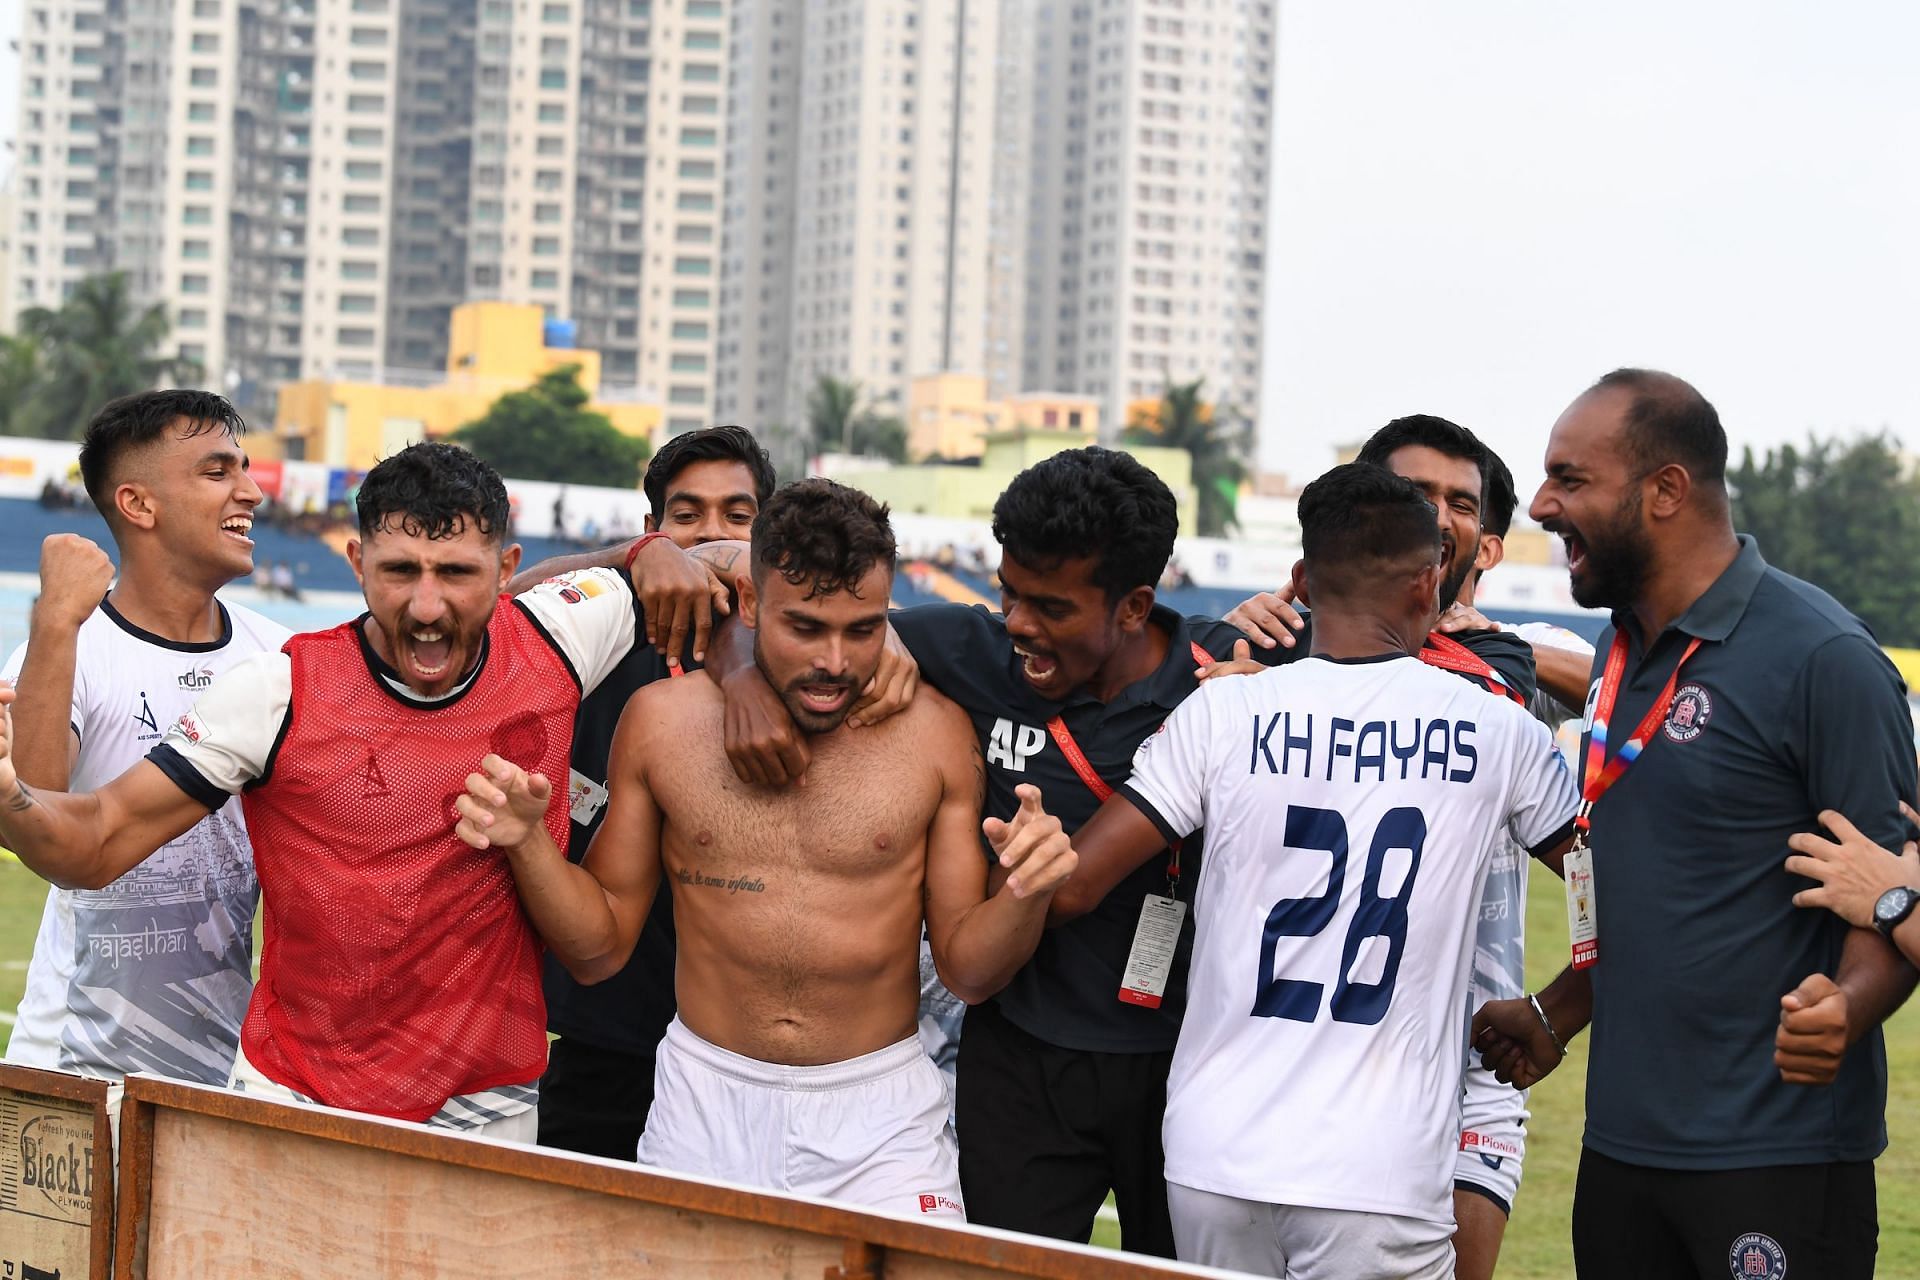 Rajasthan United FC players celebrate their win over Indian Navy FT. [Credits: Image R]